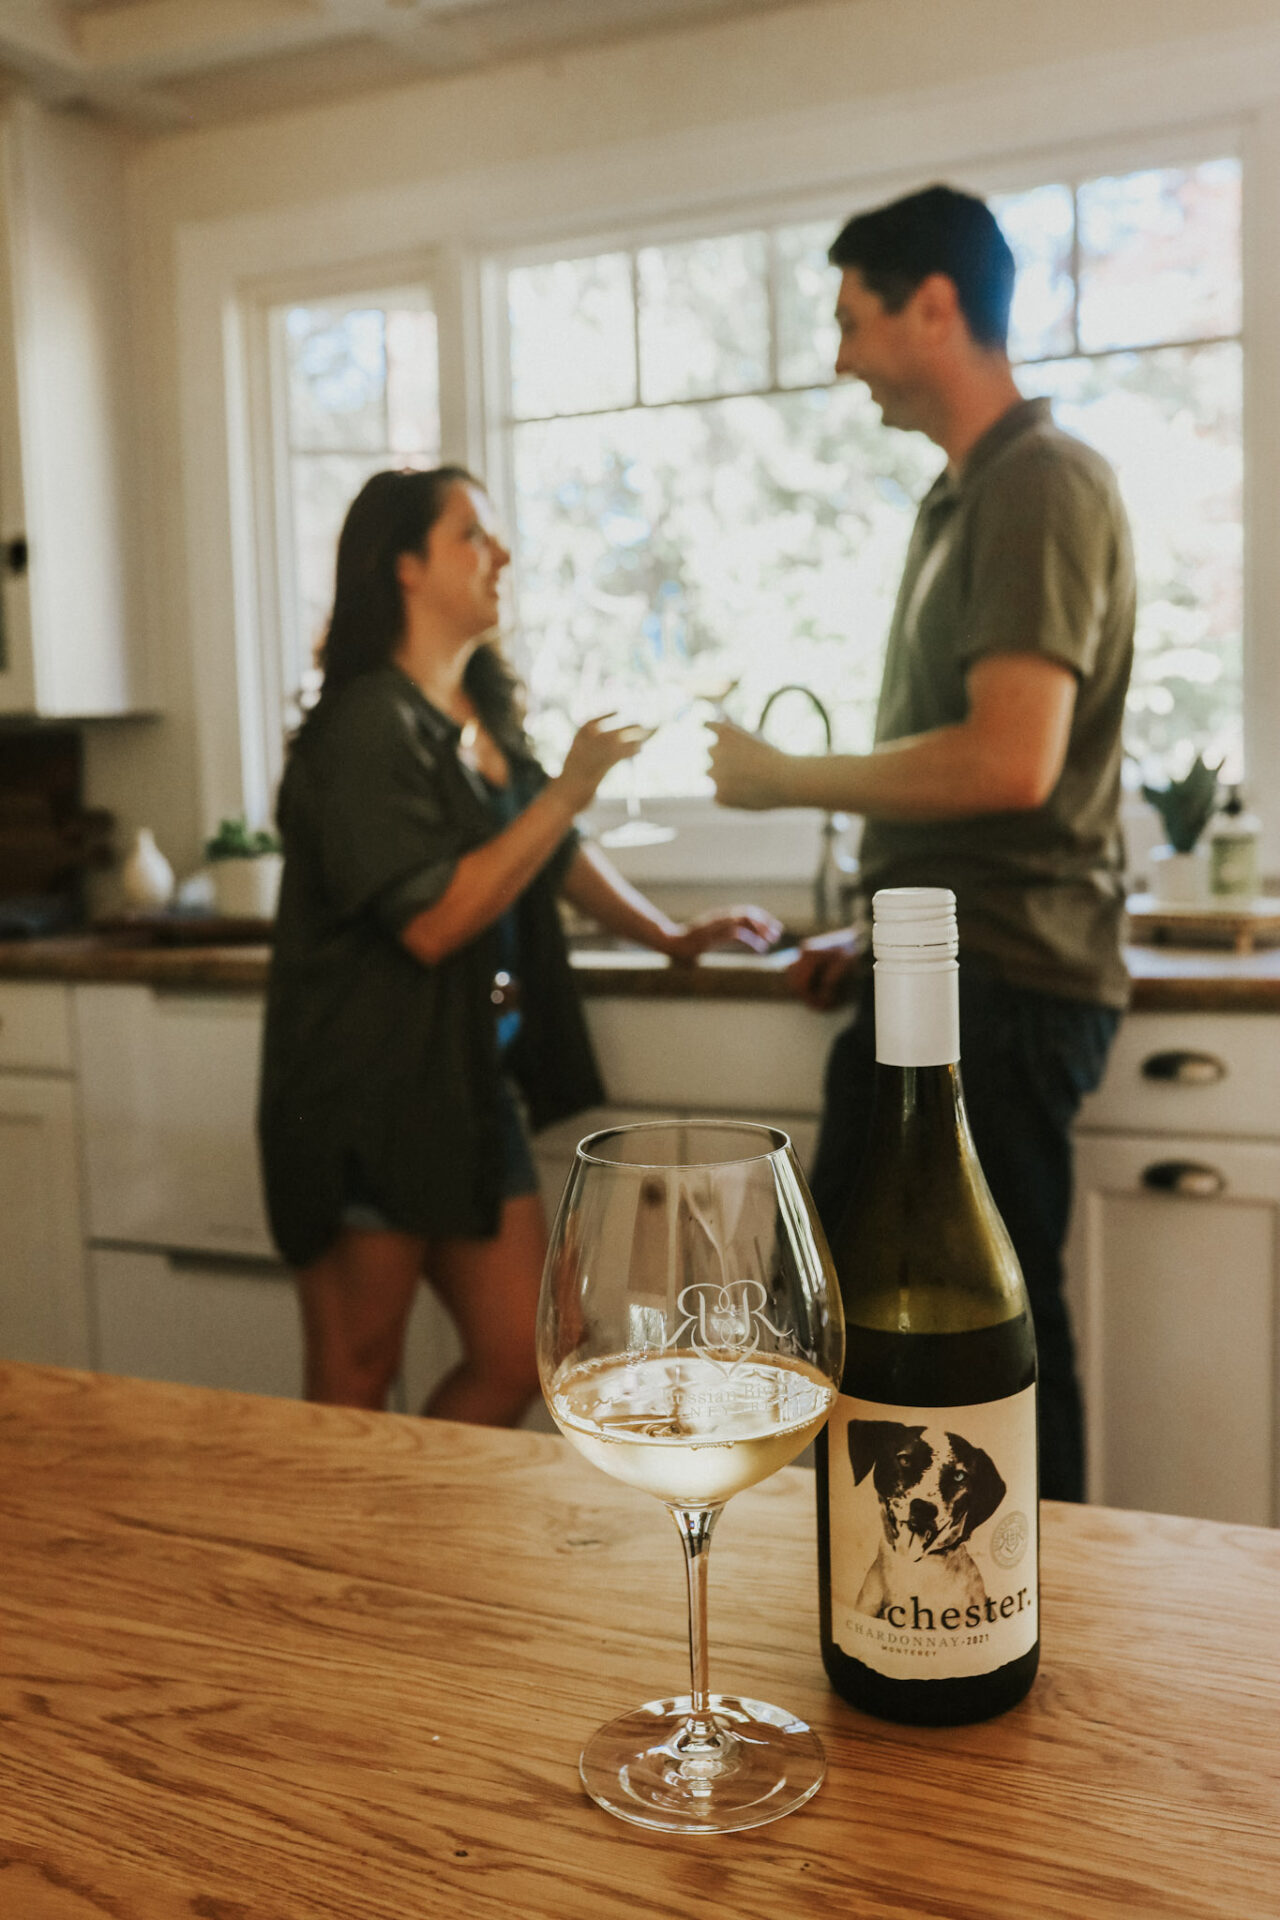 A glass of unoaked Chardonnay next to a bottle on a kitchen counter. A couple stands in the background